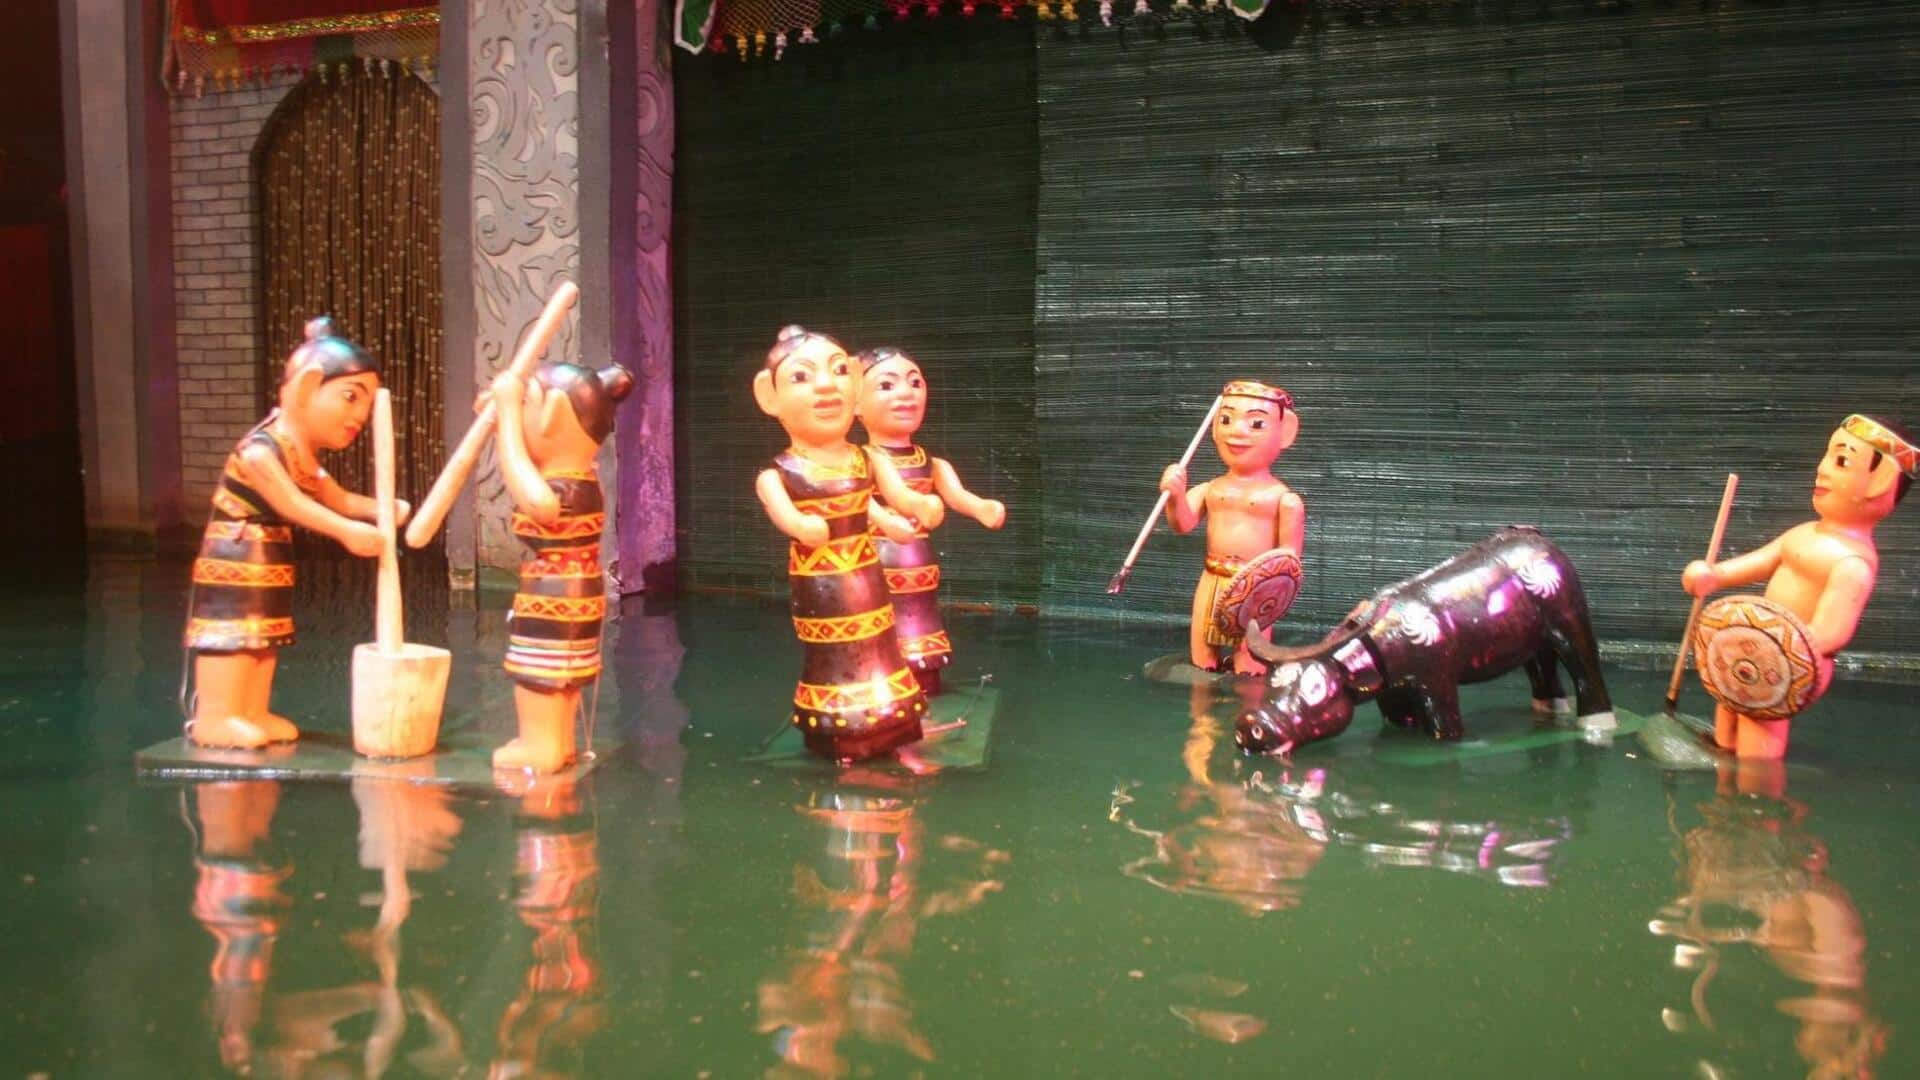 Hanoi's puppetry culture makes for an unmissable attraction